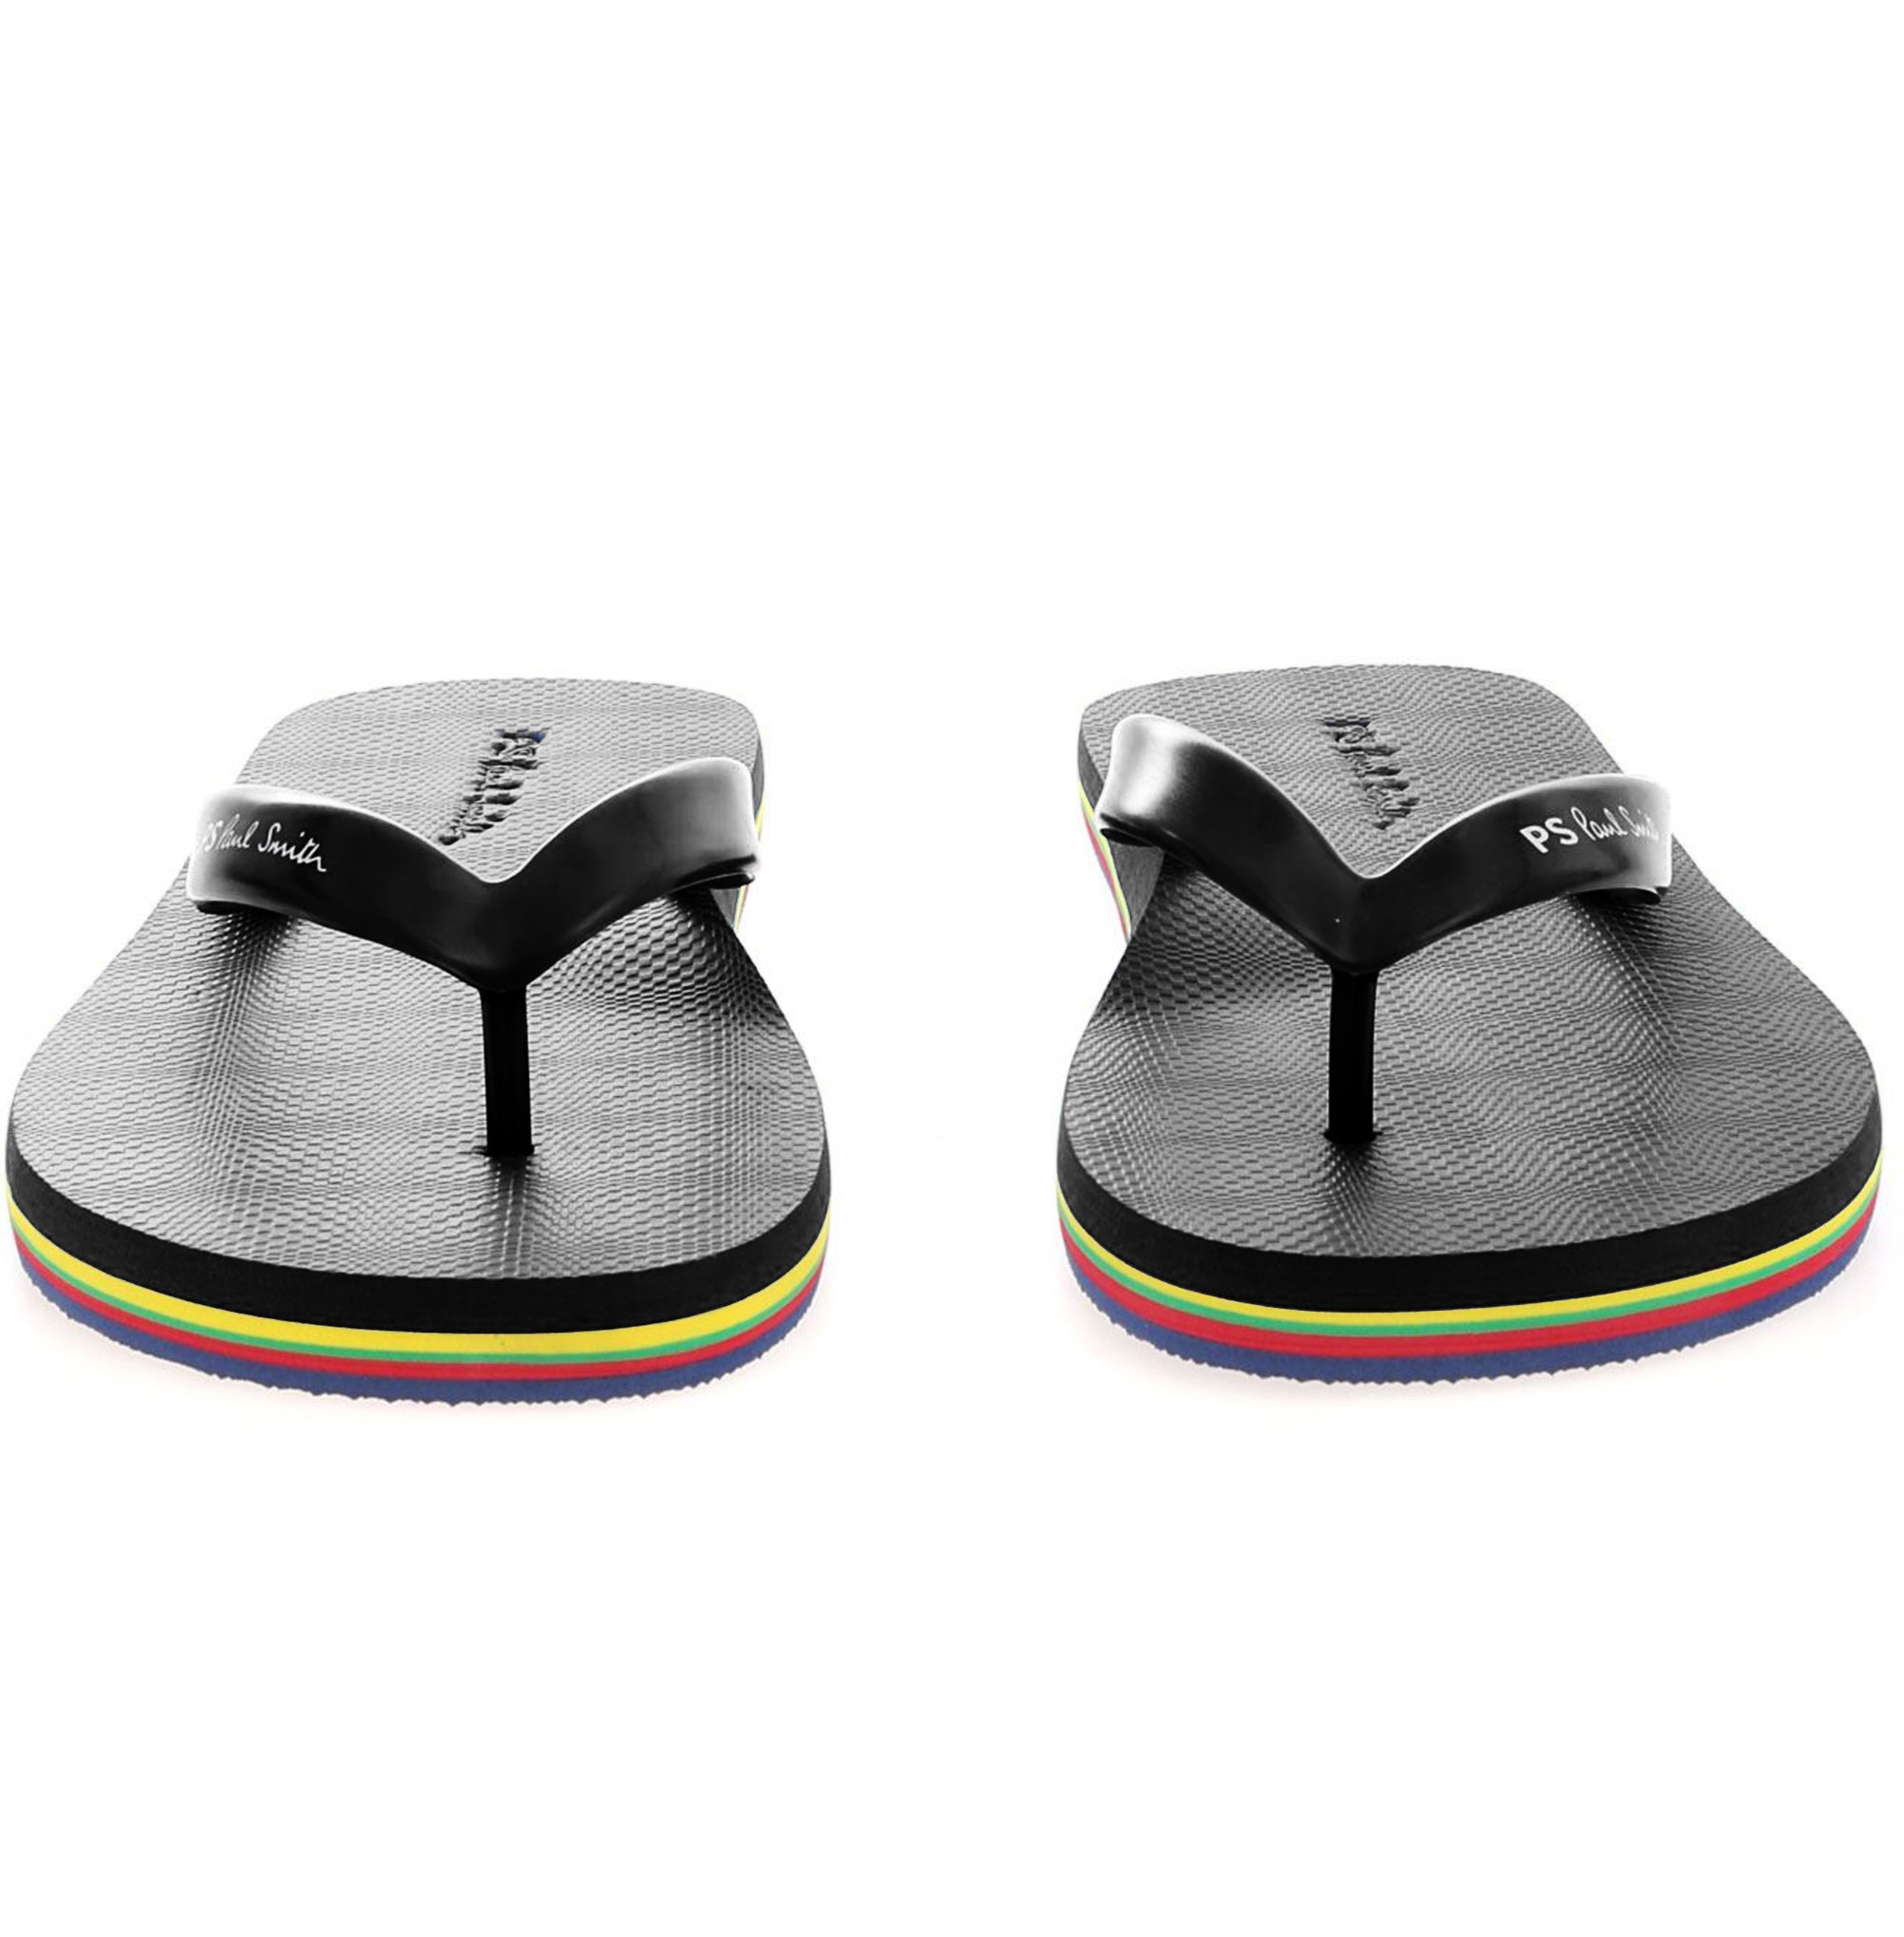 Paul Smith Sandals for Men on sale | FASHIOLA.ae